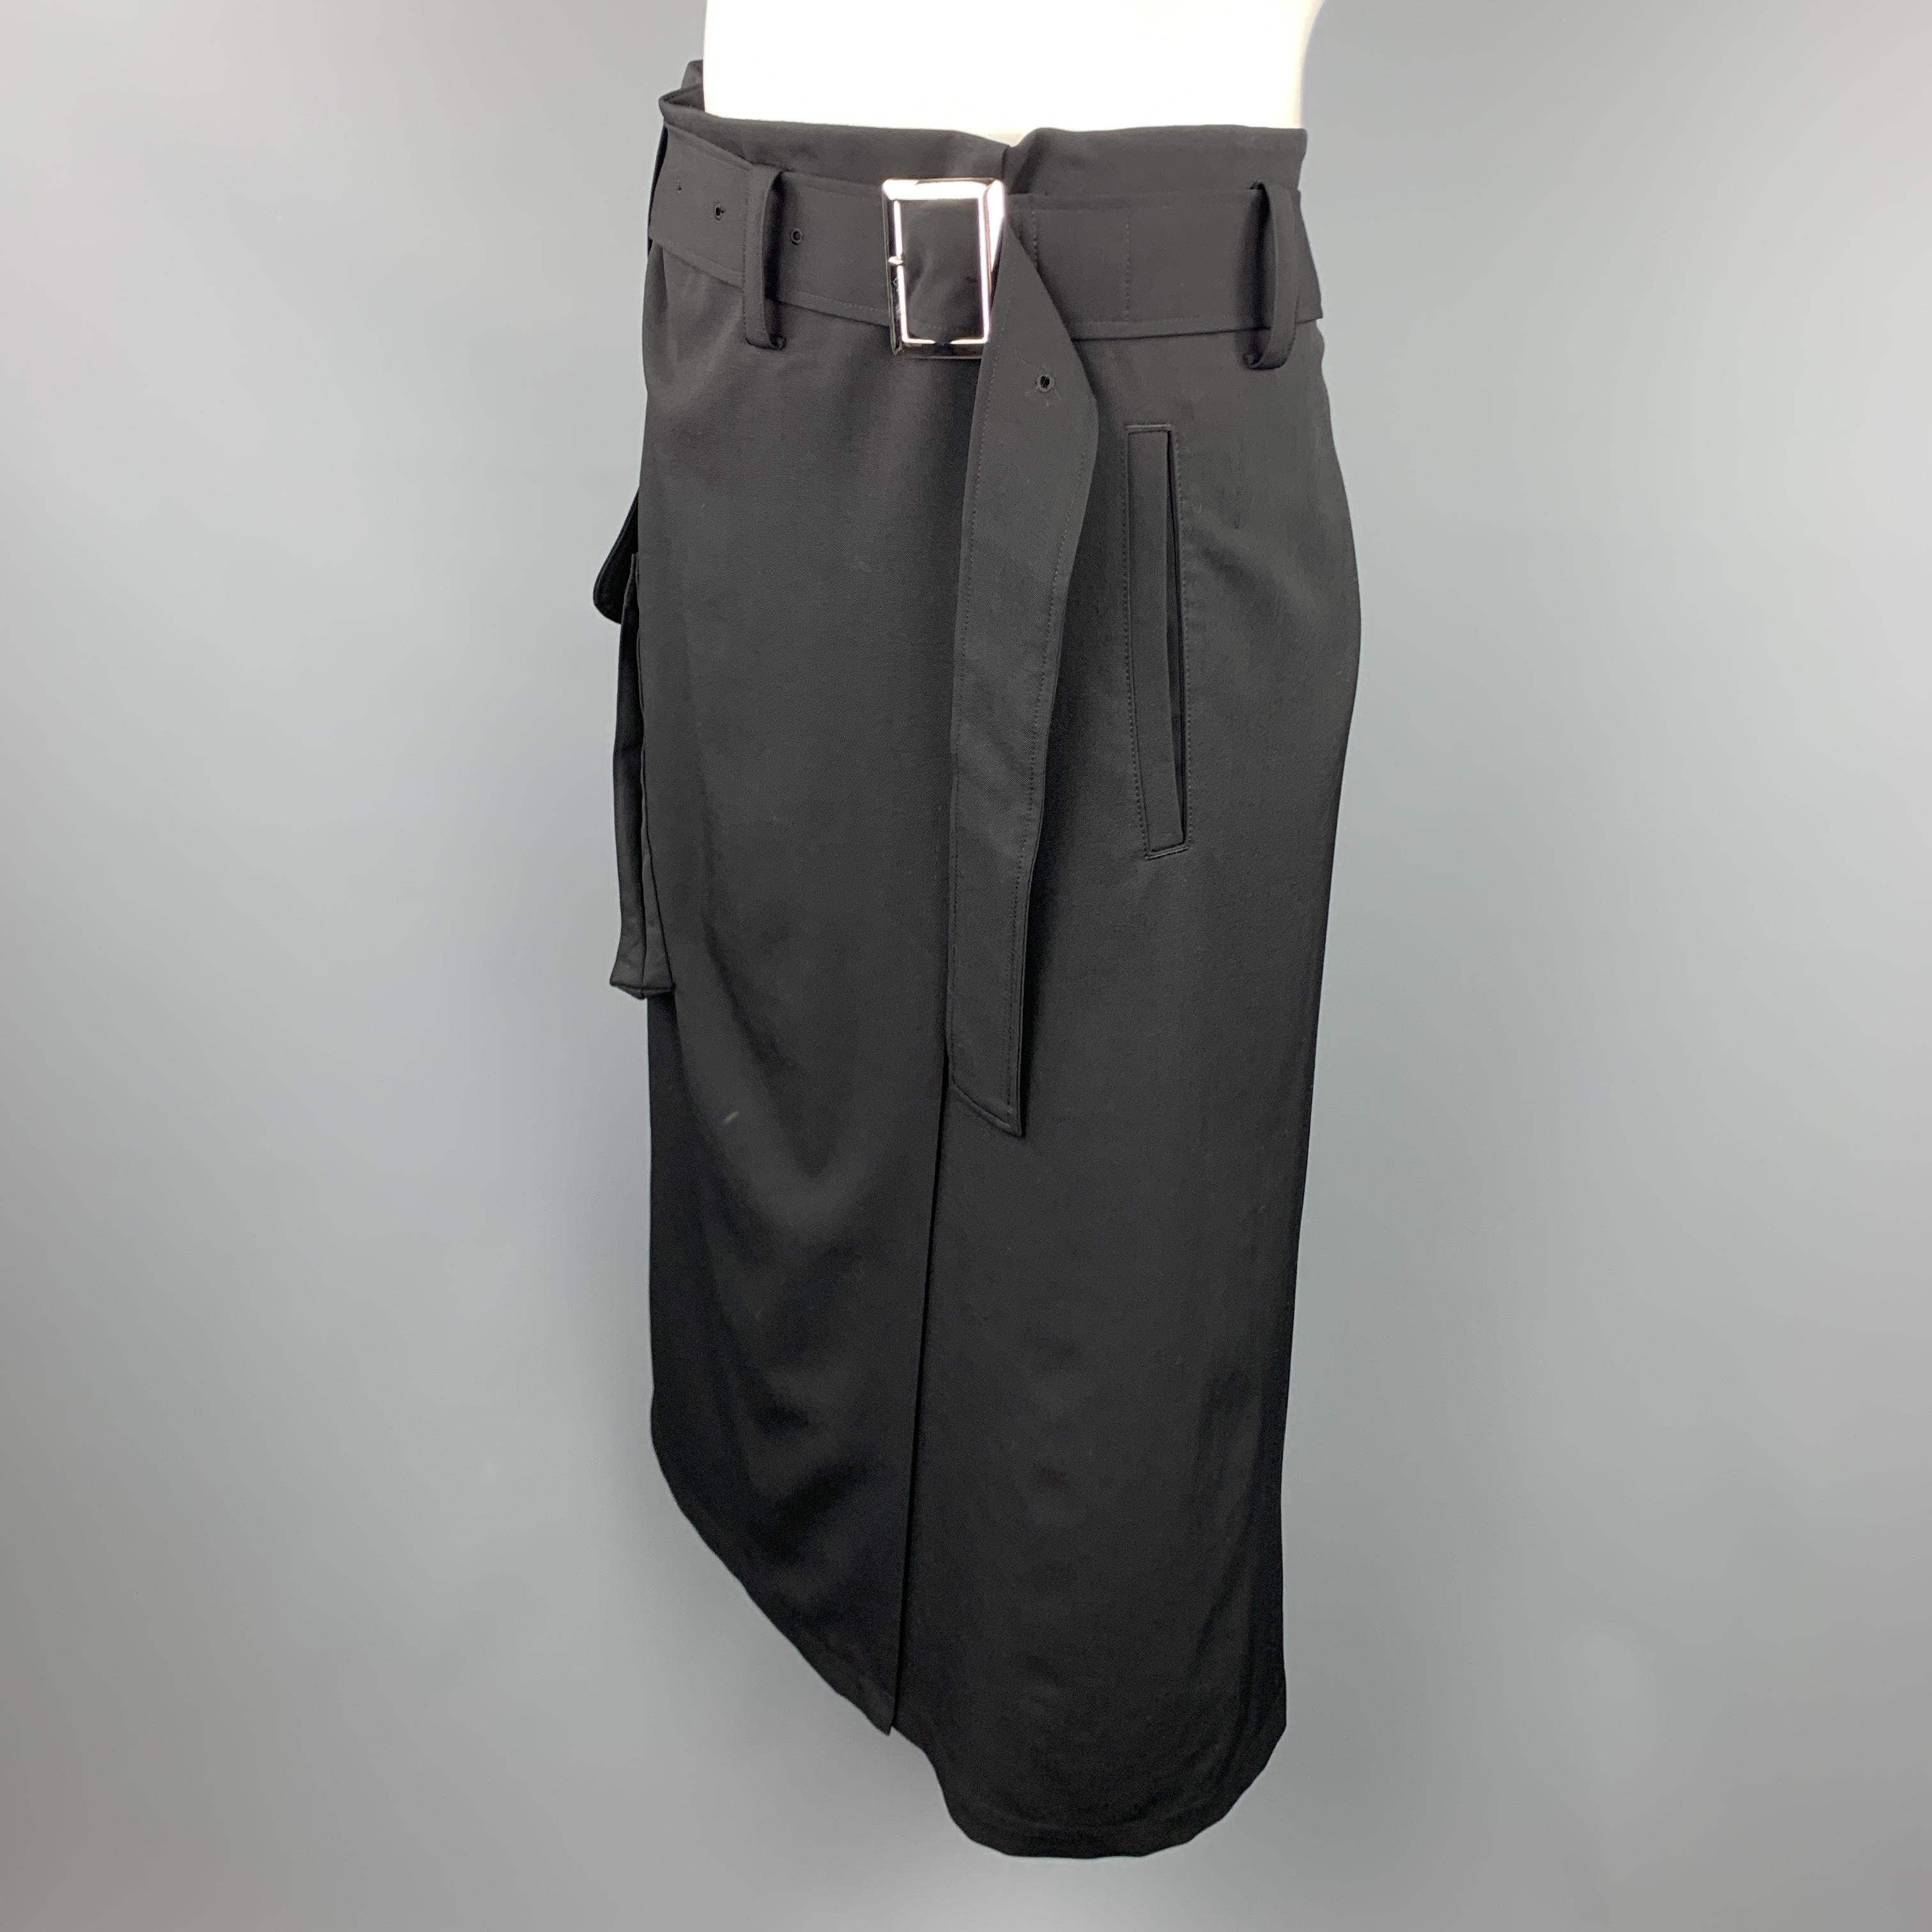 Y'S by YOHJI YAMAMOTO skort shorts come in black wool twill with a wrap skirt panel overlays , flap cargo pocket, and oversized waist that gathers with a matching fabric belt. Made in Japan.

Excellent Pre-Owned Condition.
Marked: JP